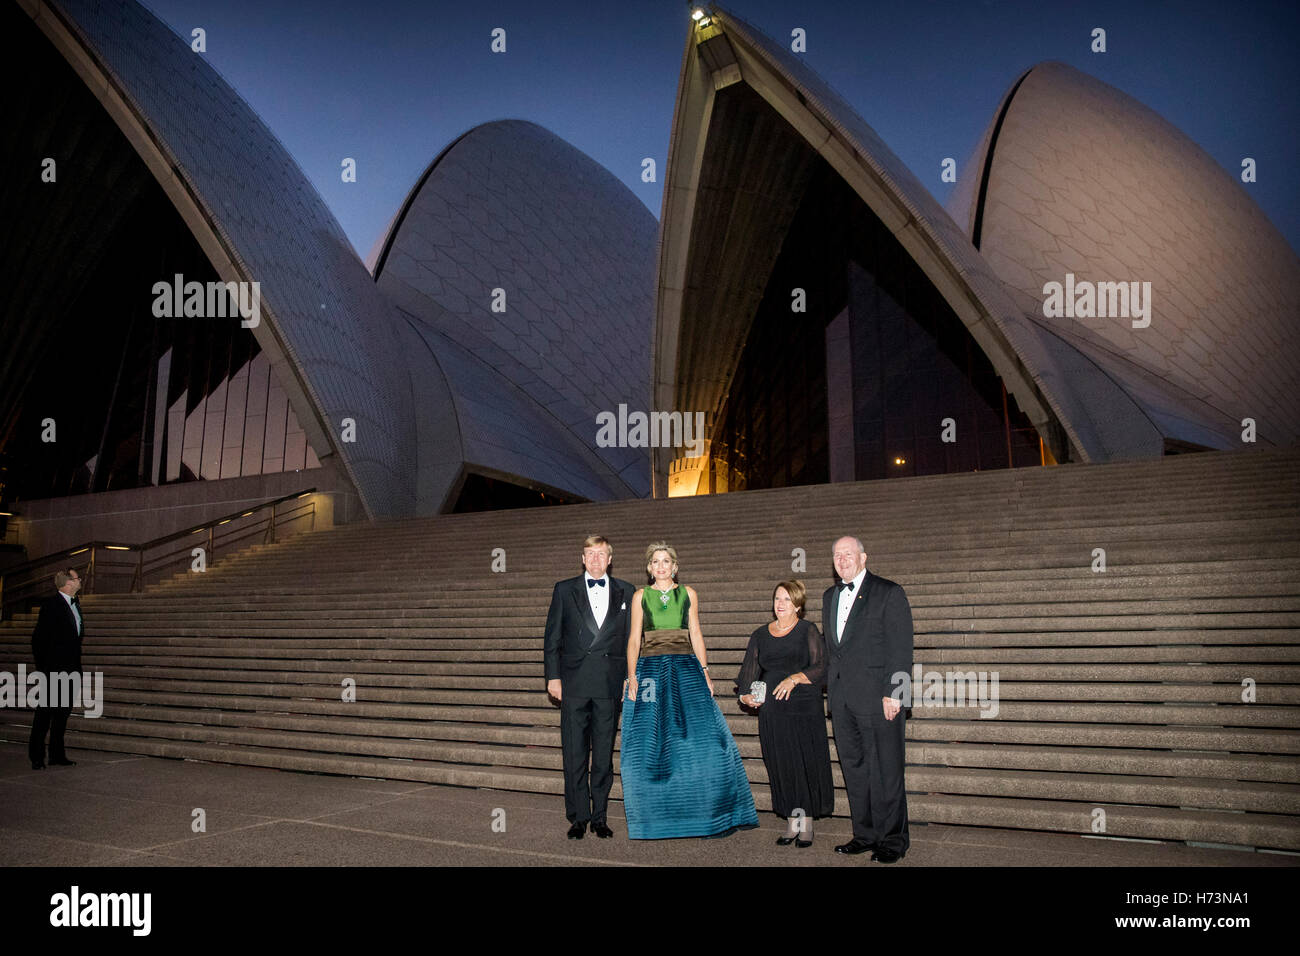 King Willem-Alexander and Queen Maxima of The Netherlands offer an concert by brothers Arthur and Lucas Jussen and the Sydney Symphony Orchestra to Australian Governor General Peter Cosgrove and his wife at the Sydney Opera House, Australia, 2 November 2016. The Dutch King and Queen are in Australia for an 5 day state visit. Photo: Patrick van Katwijk - NETHERLANDSOUT/Point de Vue Out - NO WIRE SERVICE - Stock Photo